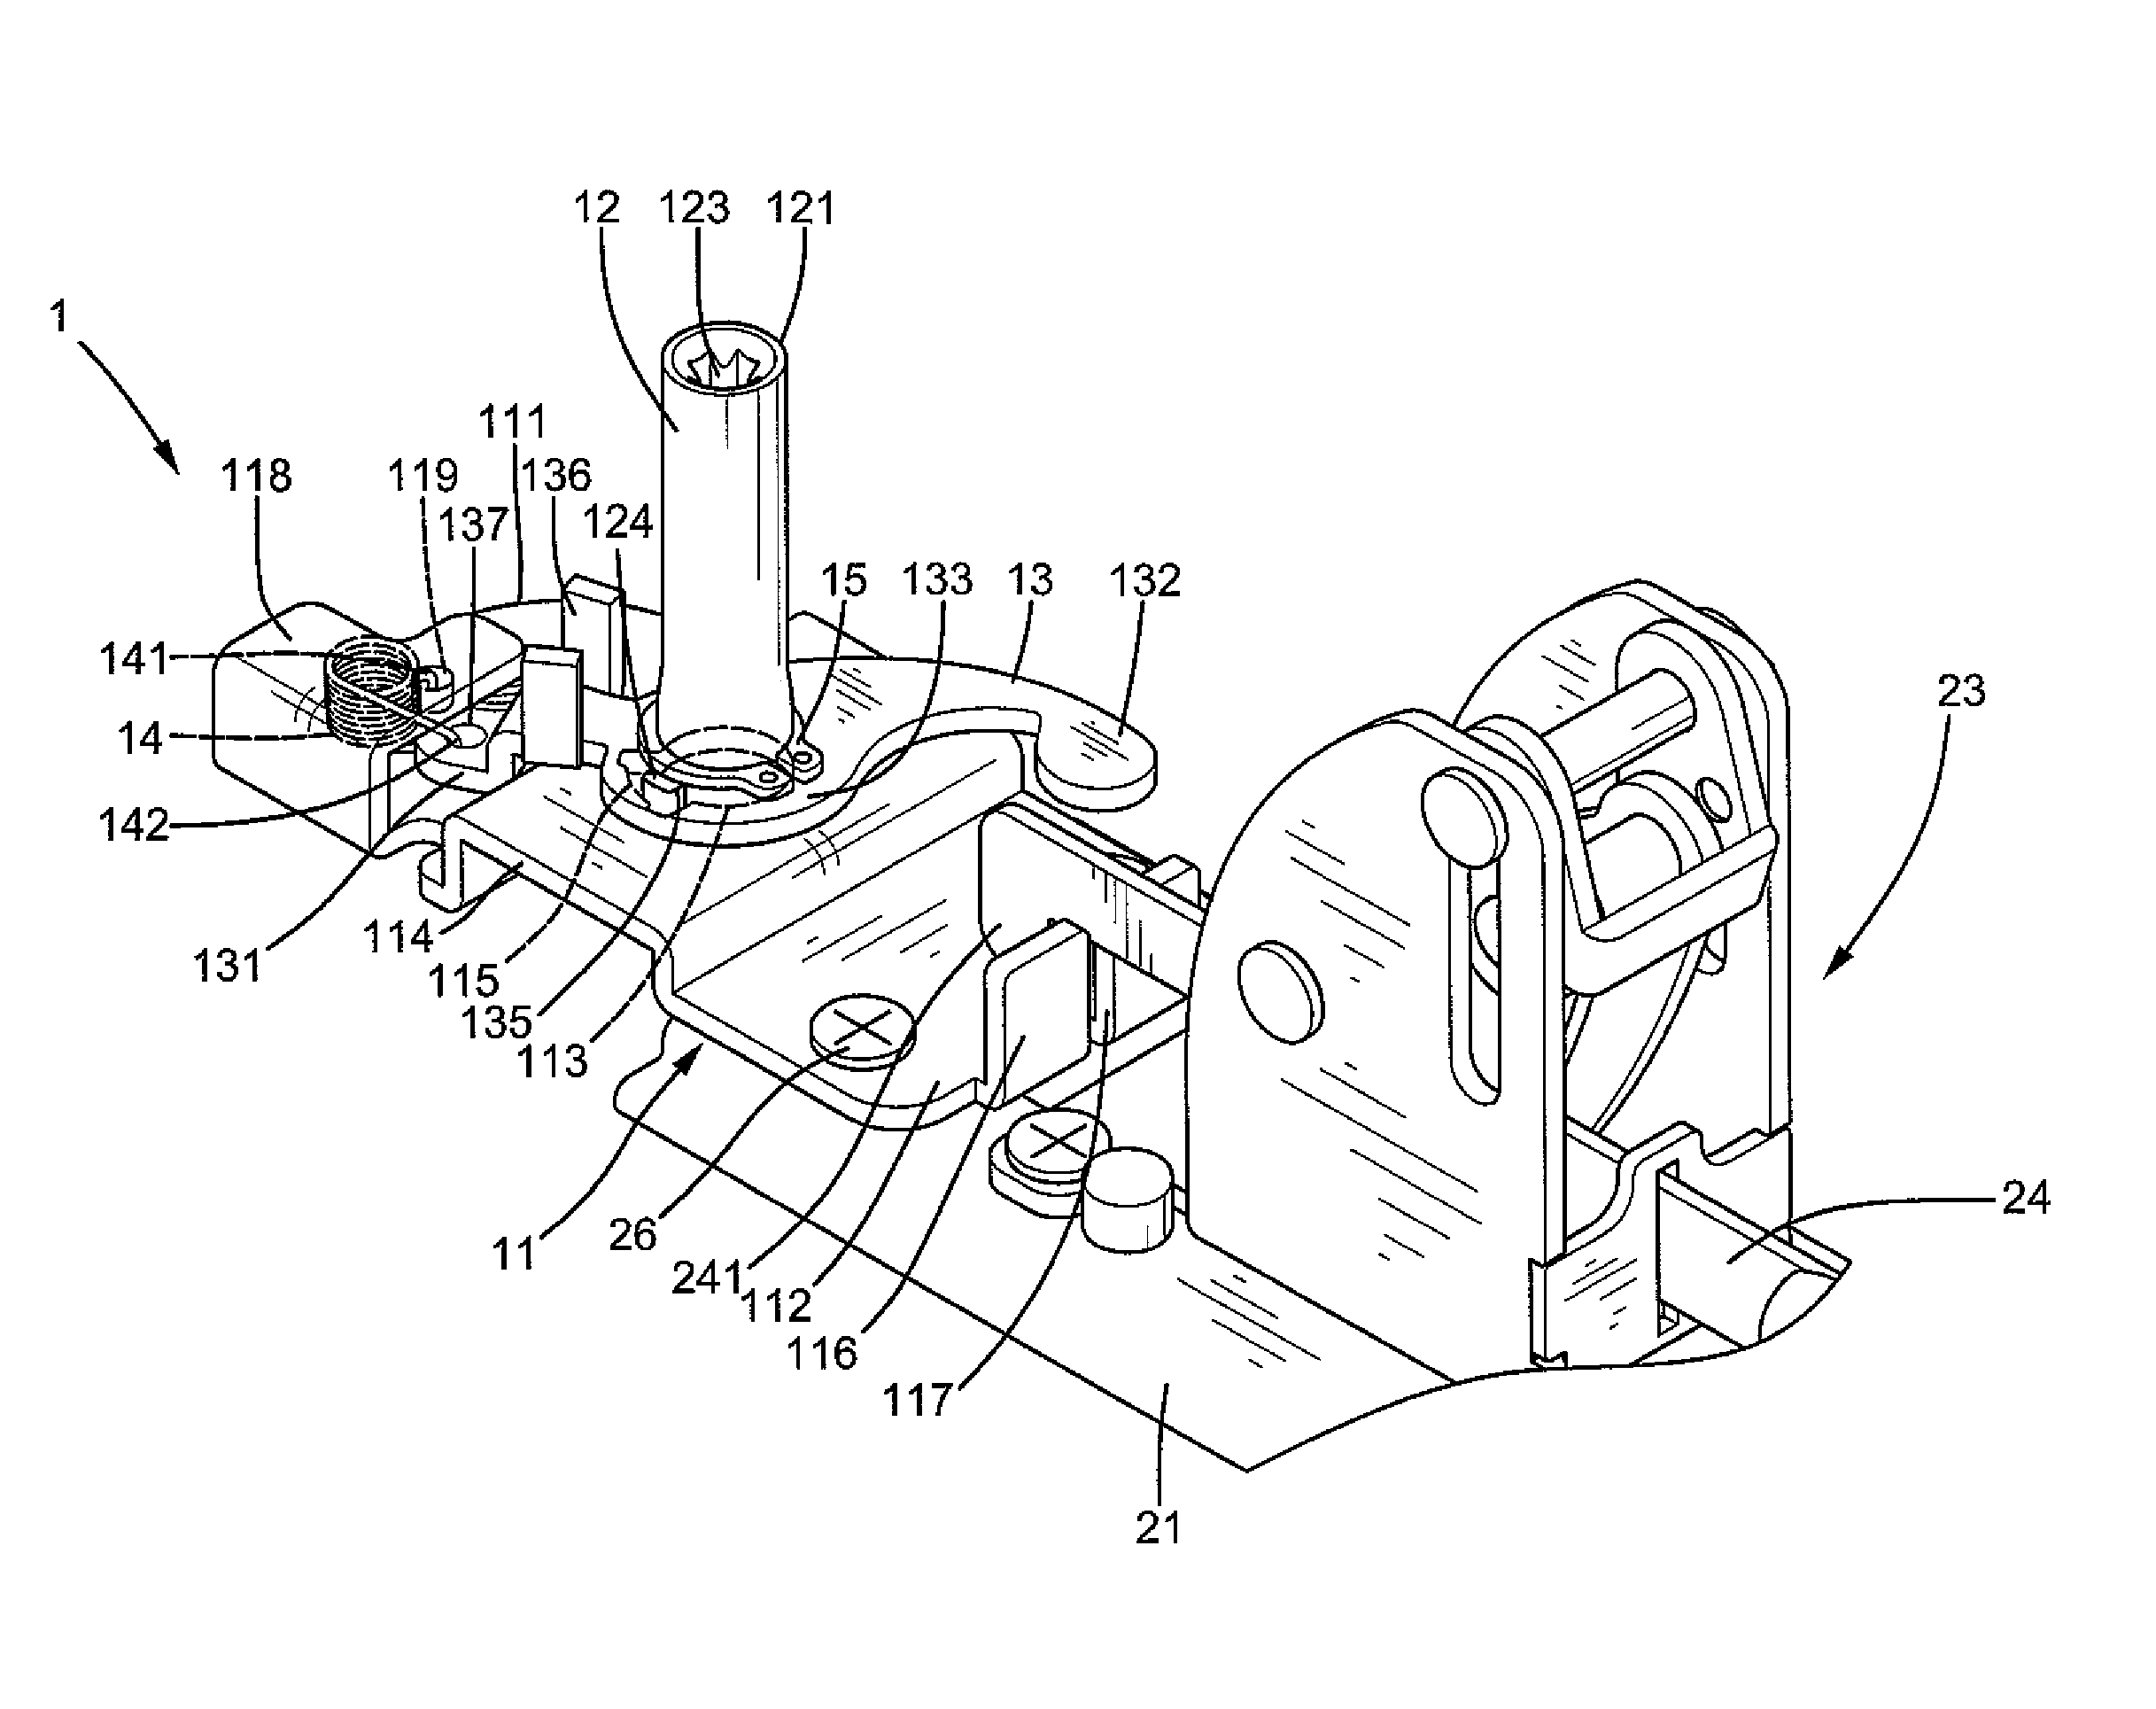 Dogging device for latch assembly